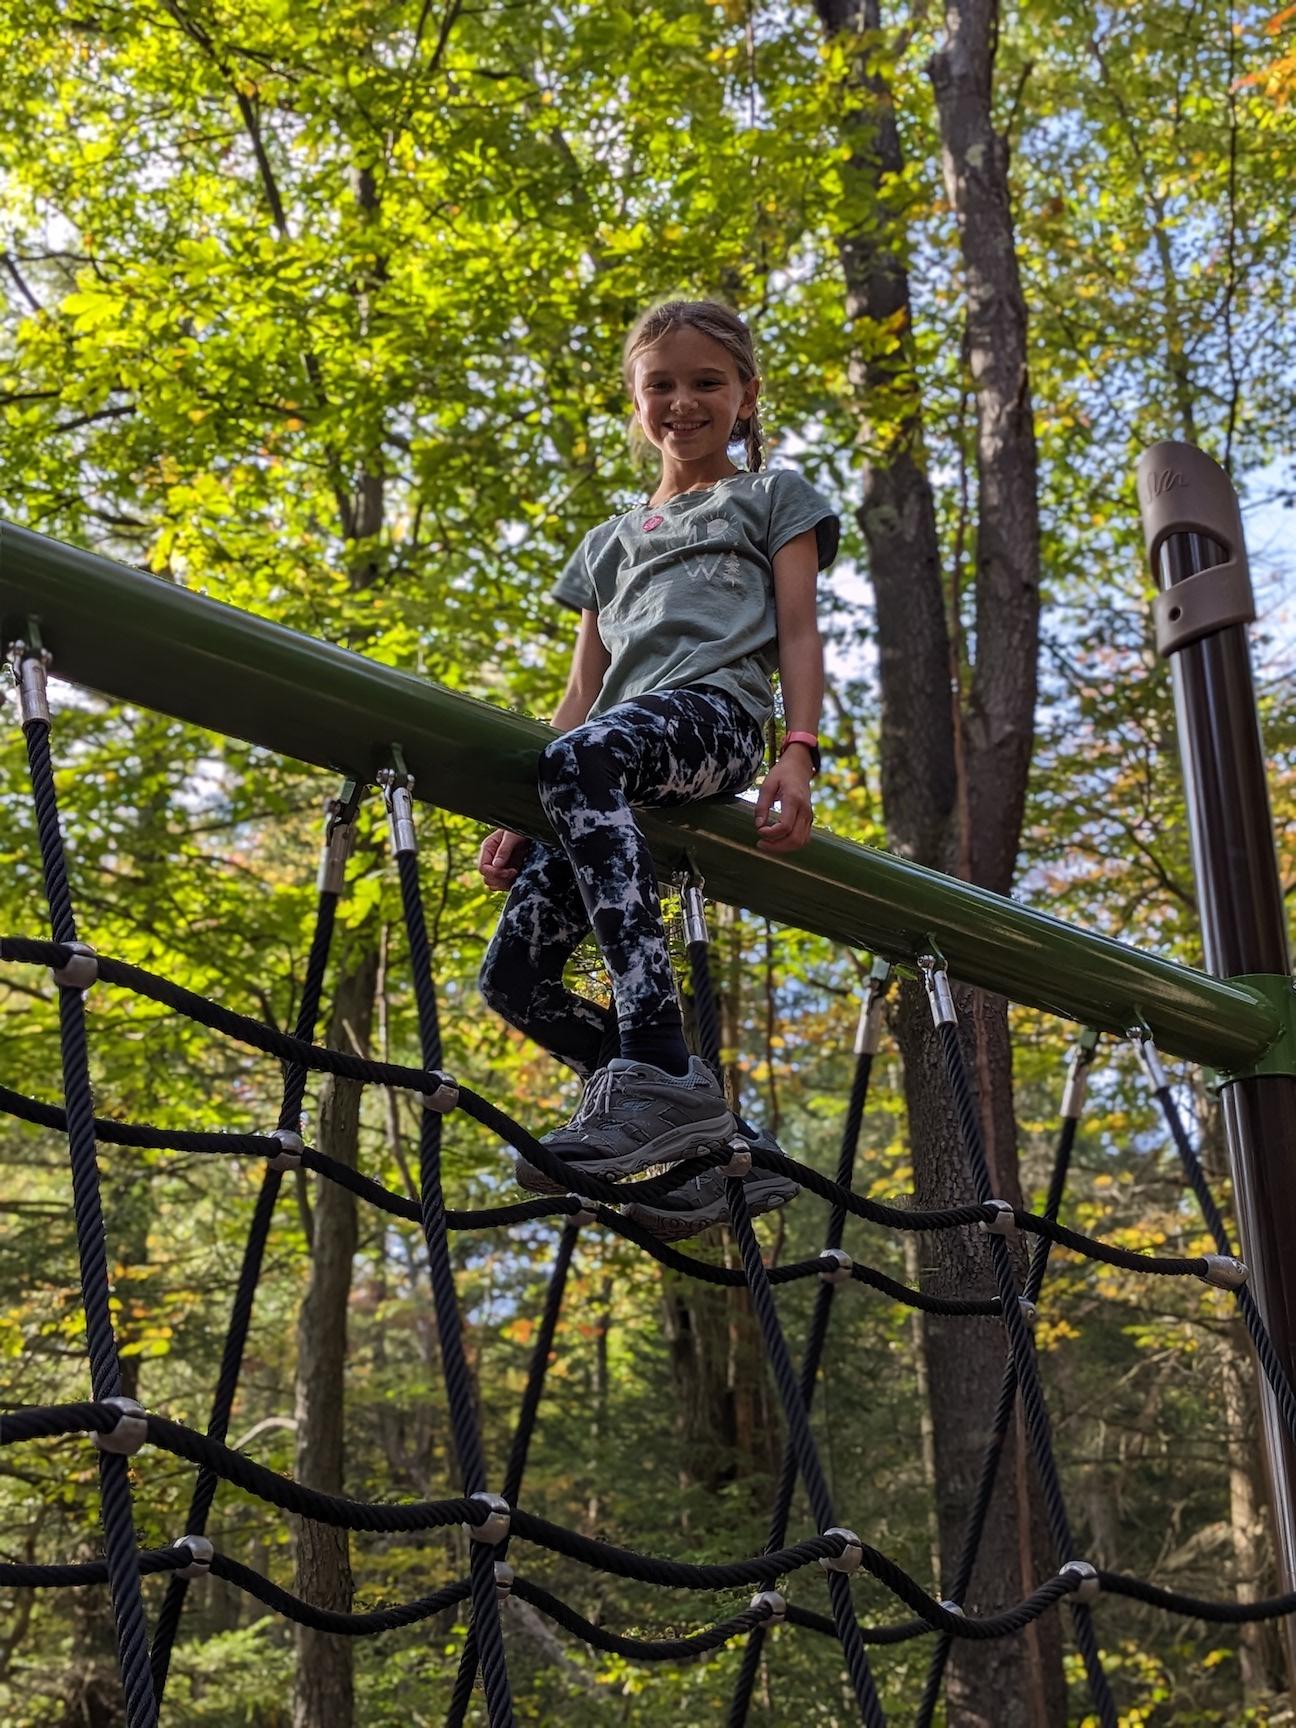 Elizabeth Urso of McCullough tackles the ropes course